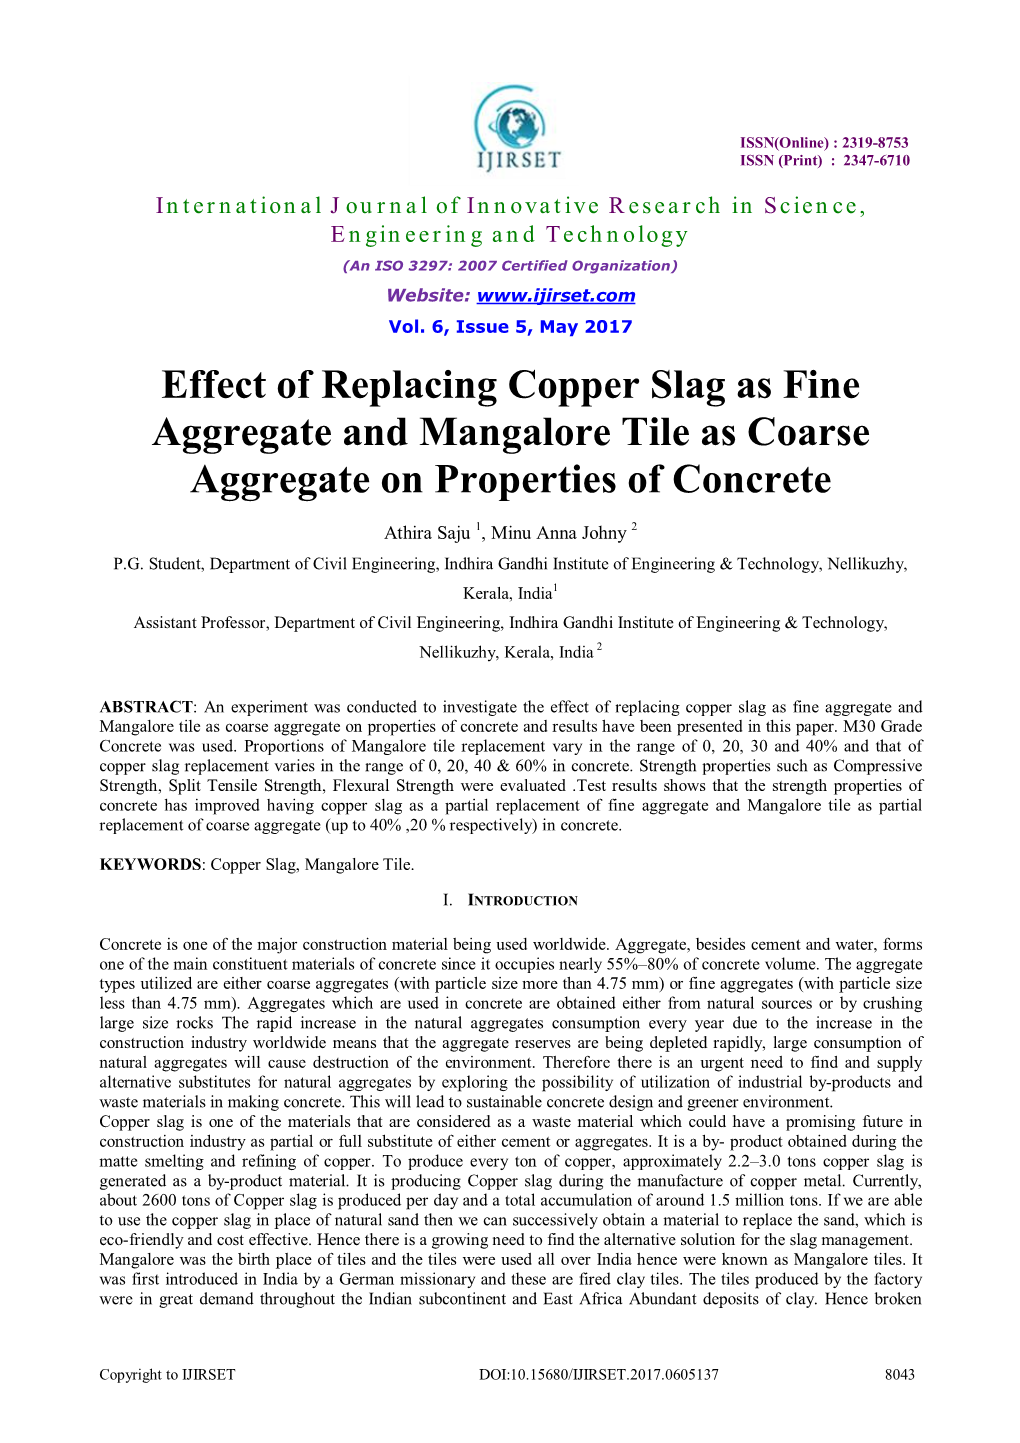 Effect of Replacing Copper Slag As Fine Aggregate and Mangalore Tile As Coarse Aggregate on Properties of Concrete